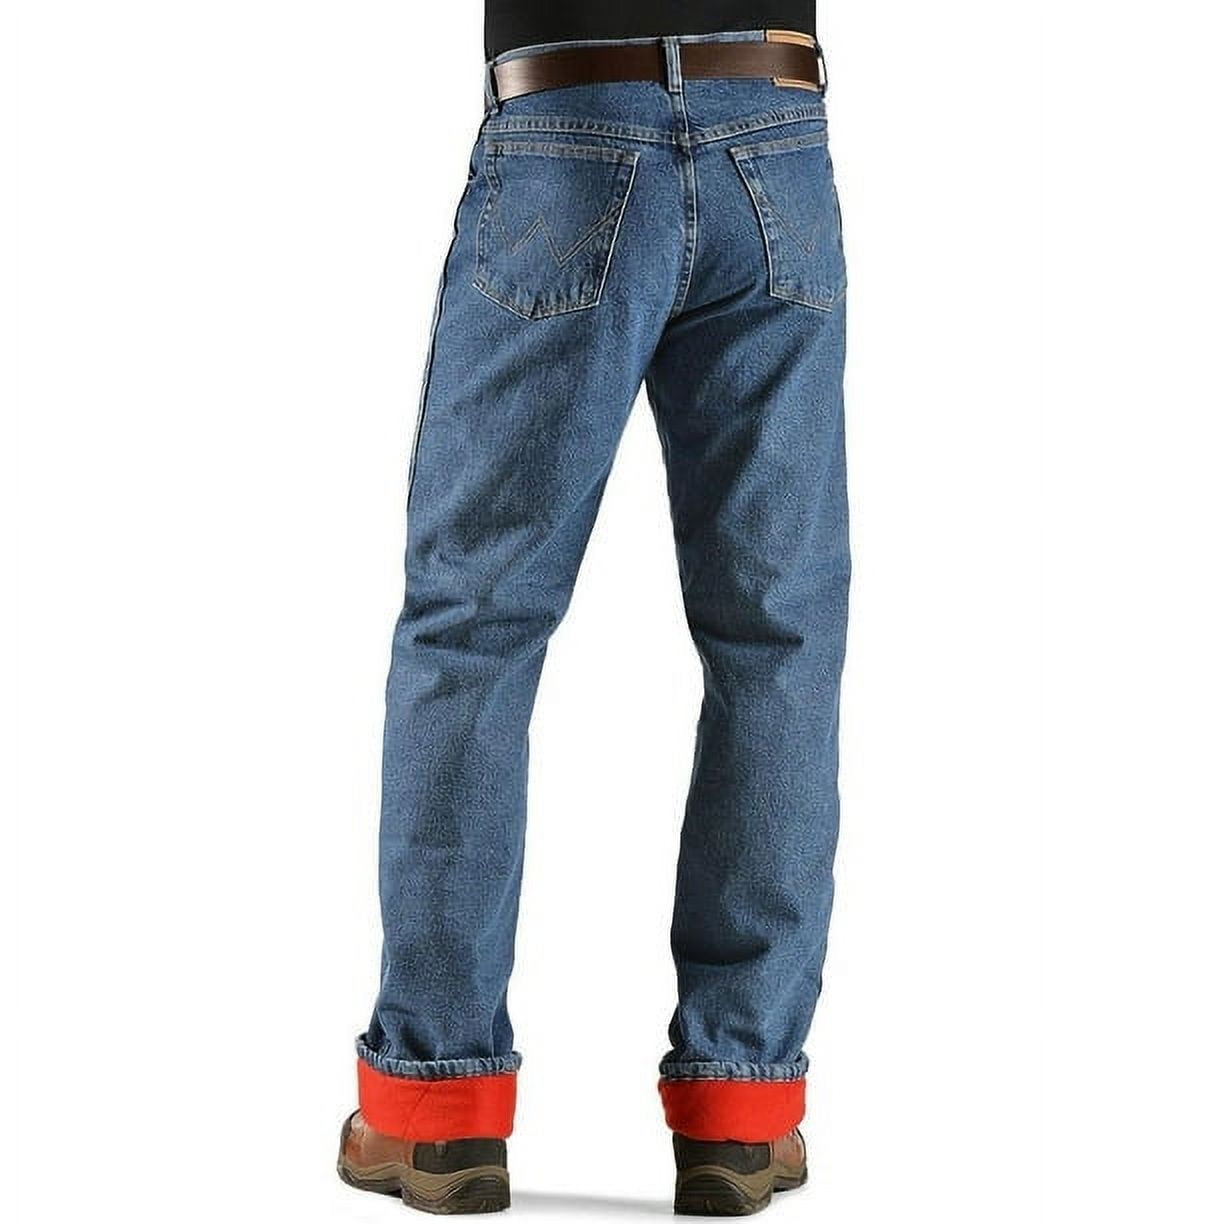 Wrangler Men's Jeans Rugged Wear Relaxed Fit Flannel Lined - 33213Sw 